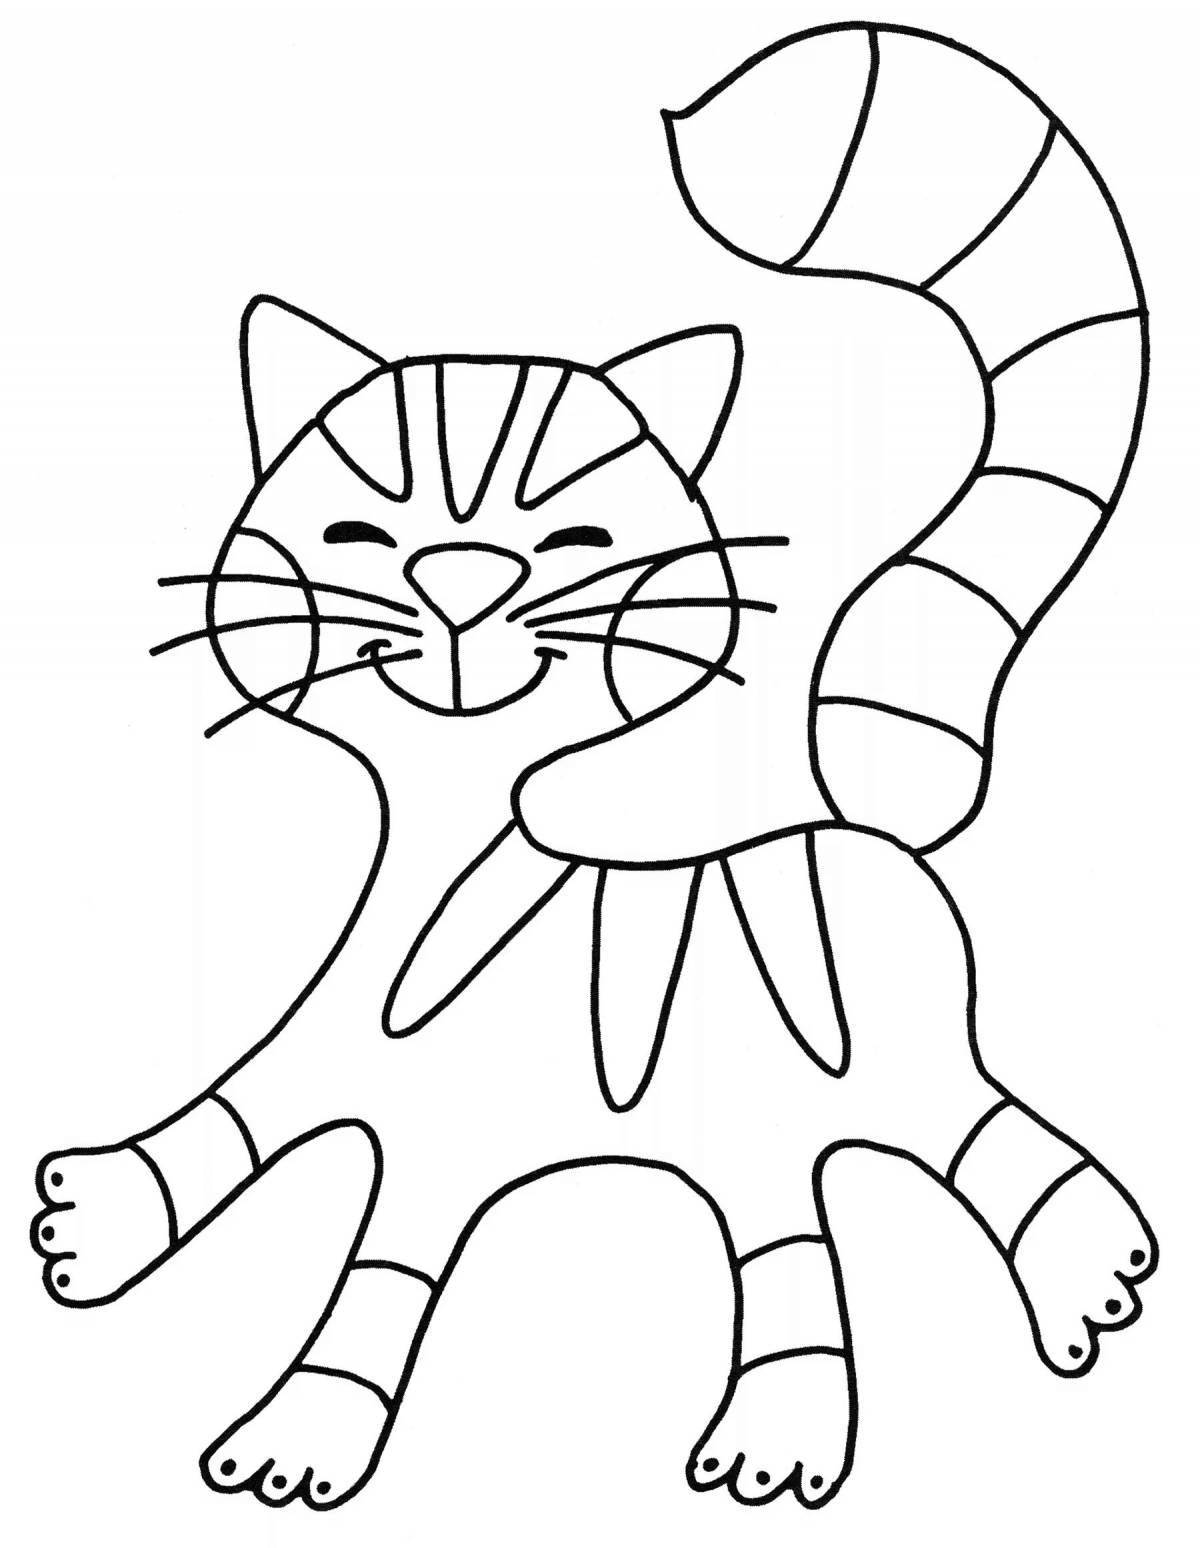 Coloring fluffy tabby cat